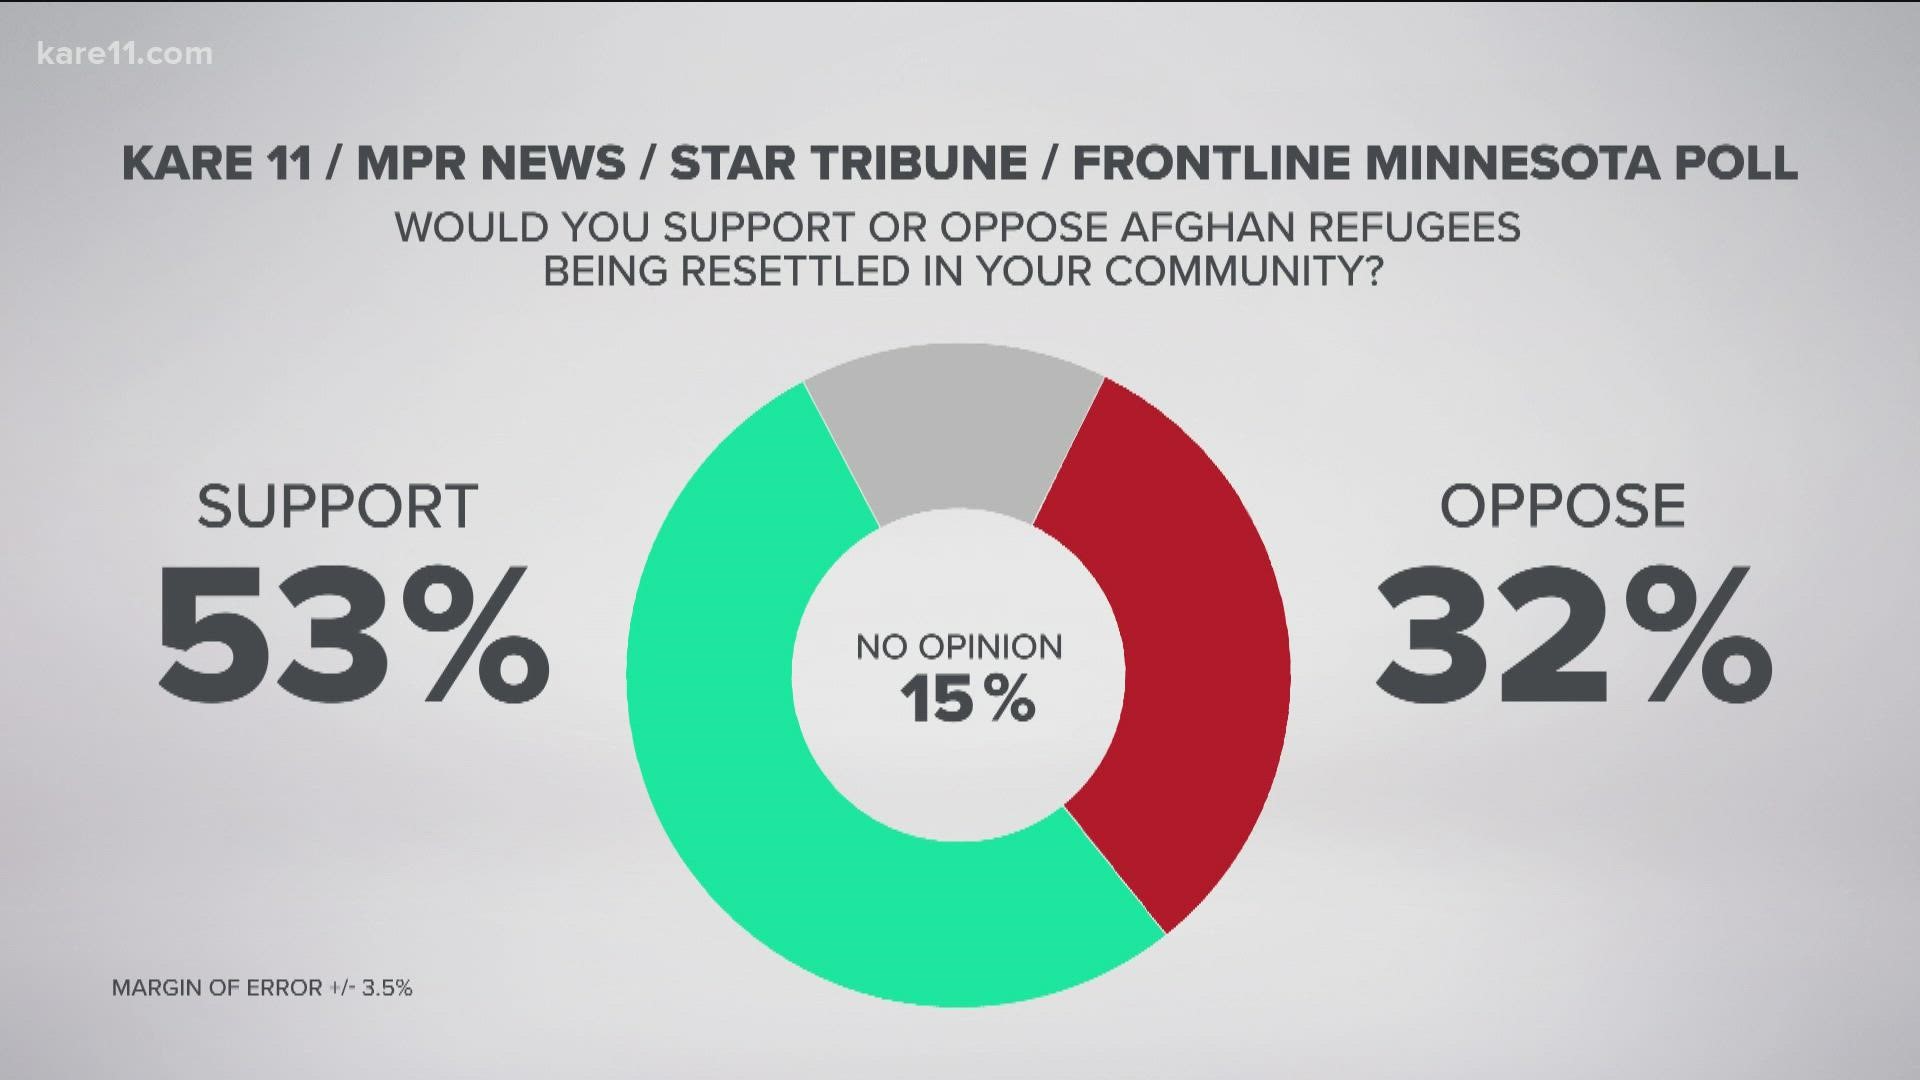 A new KARE 11/MPR News/Star Tribune/FRONTLINE Minnesota Poll found 53% of Minnesota voters would support resettling Afghan refugees in their own community.